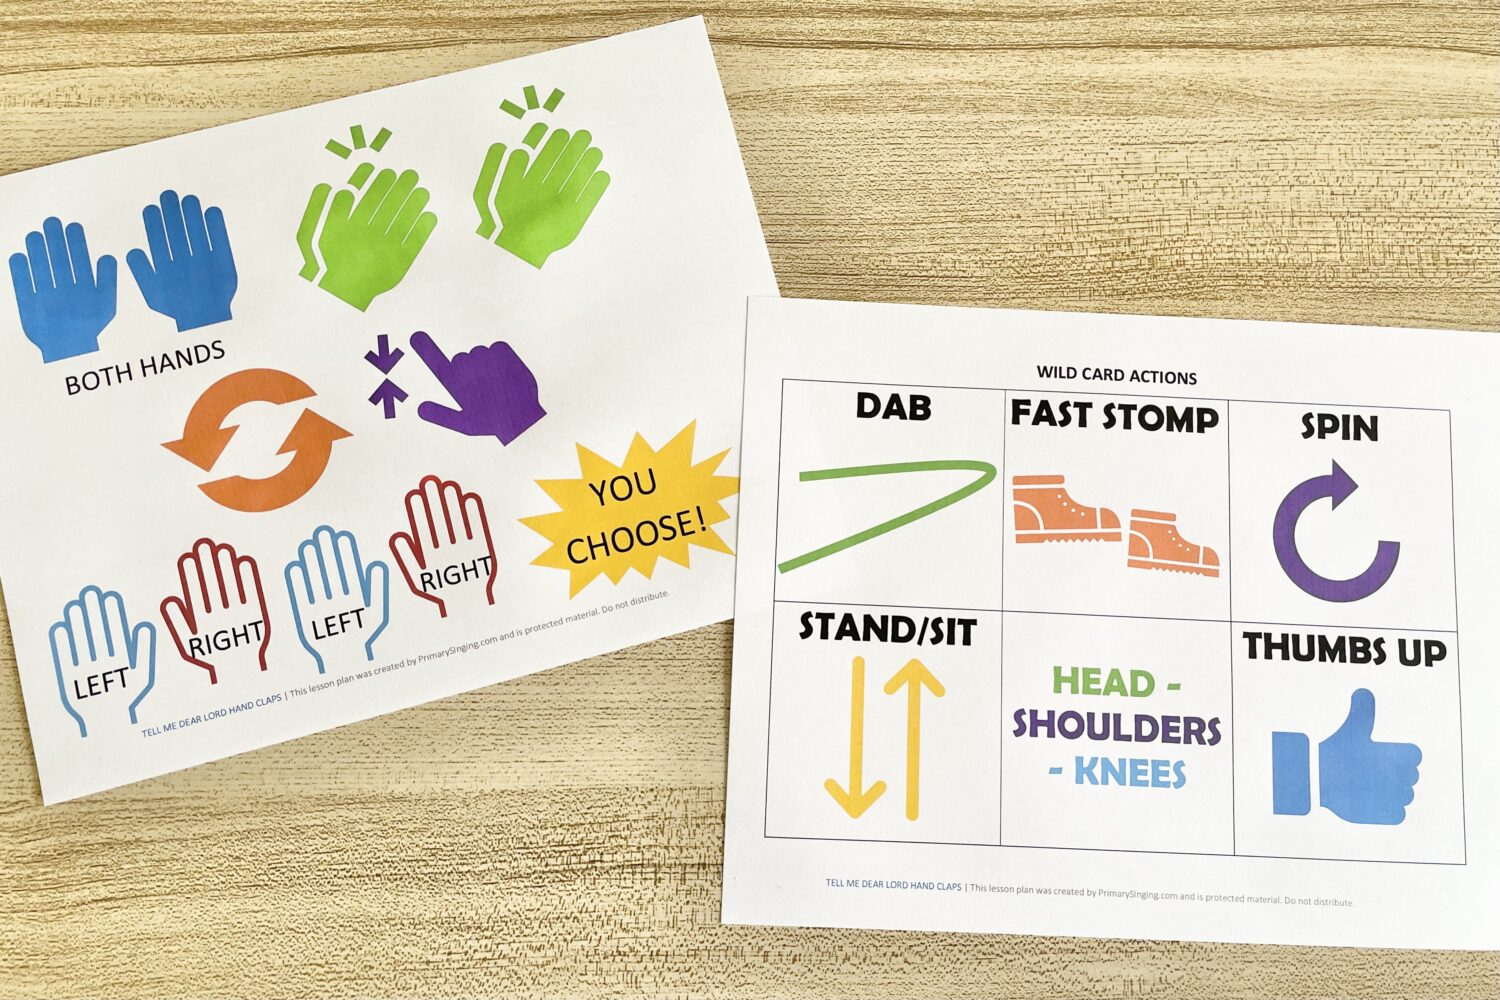 Tell Me Dear Lord Hand Claps! Try this fun hand clap pattern with printable song helps for LDS Primary Music Leaders.